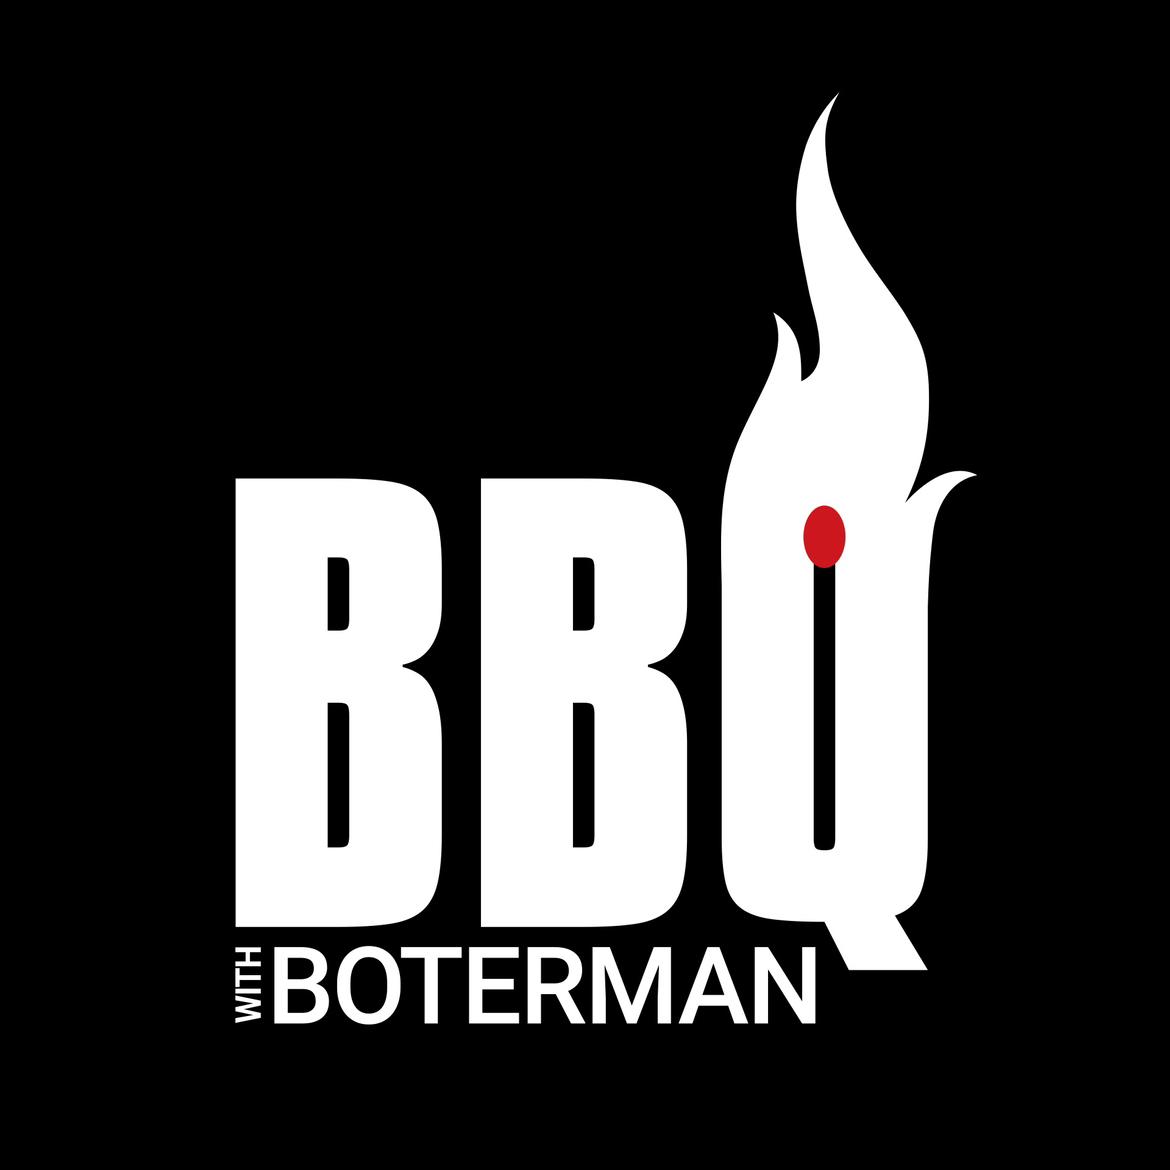 BBQWithBoterman's images